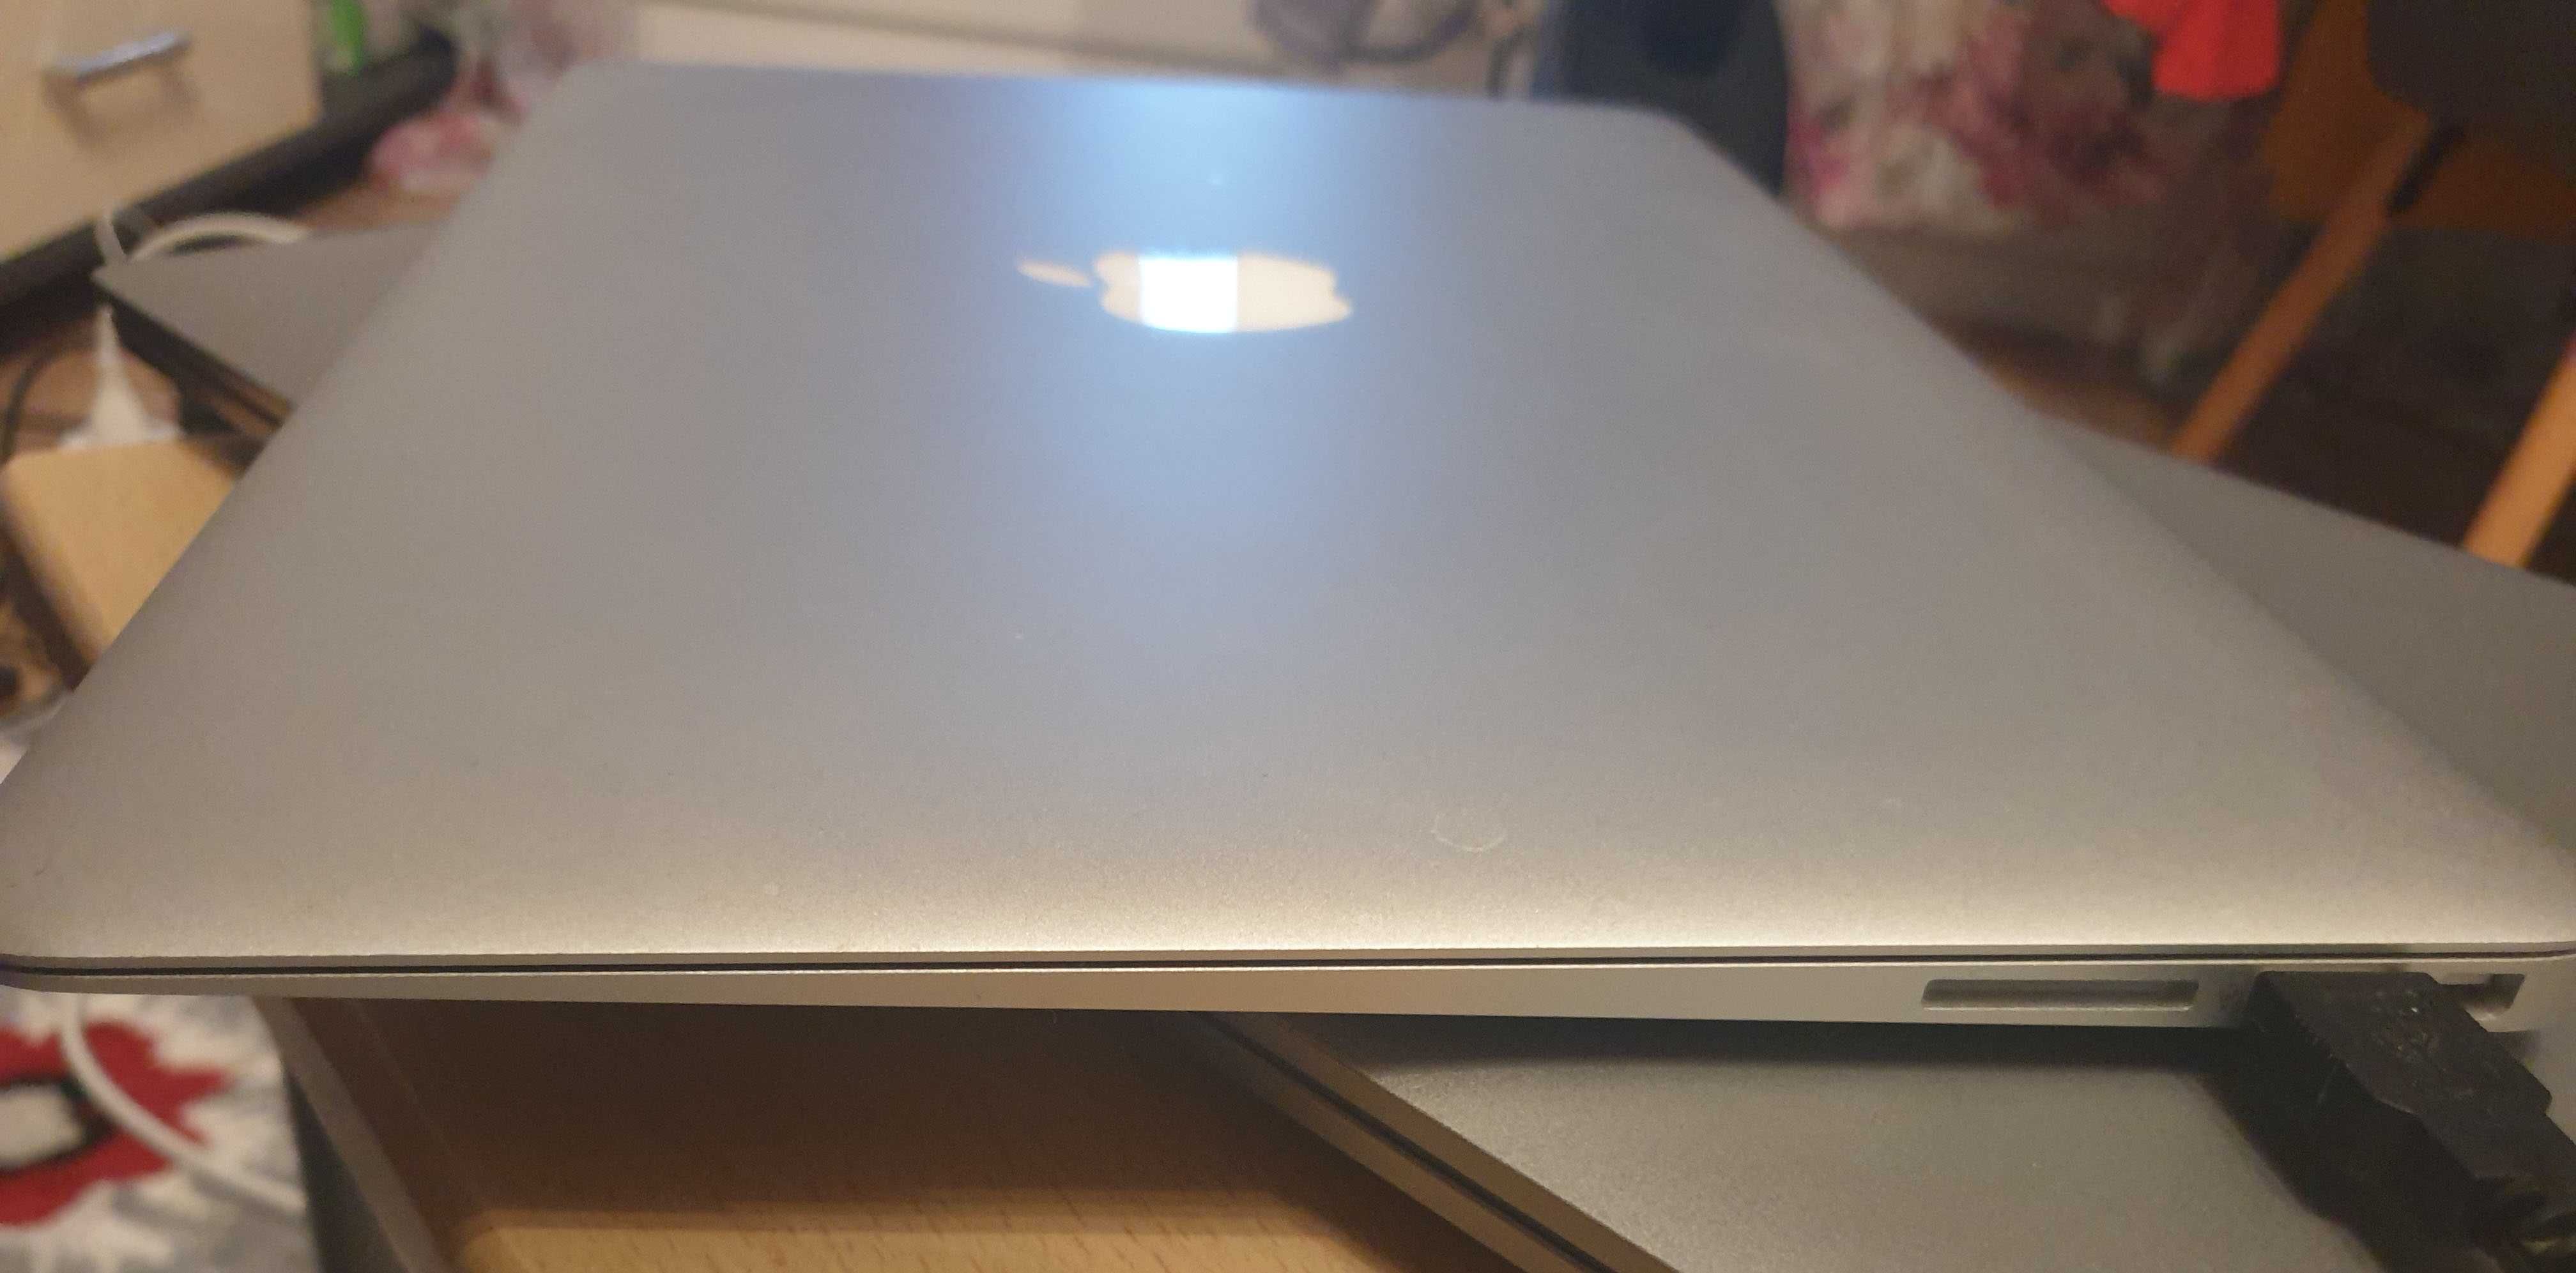 Macbook Air, I7, 2.2 Ghz,2017, SSD 512 Gb - impecabil (adus din State)